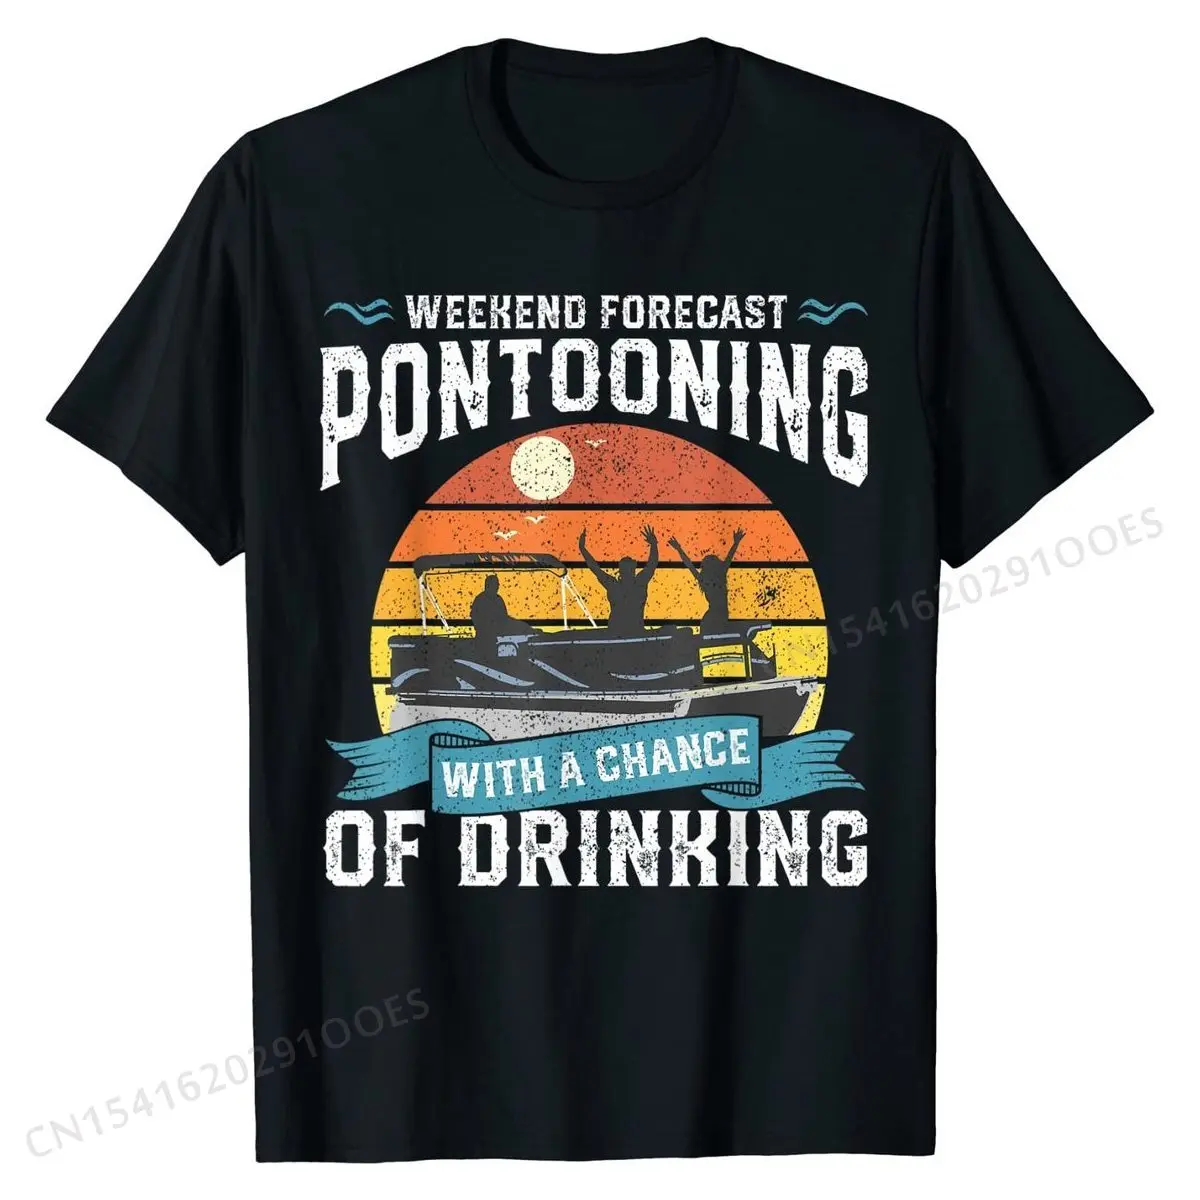 

Weekend Forecast Pontooning Drinking Pontoon Boating Gift T-Shirt Special Mens Top T-shirts Simple Style Tees Cotton Normal